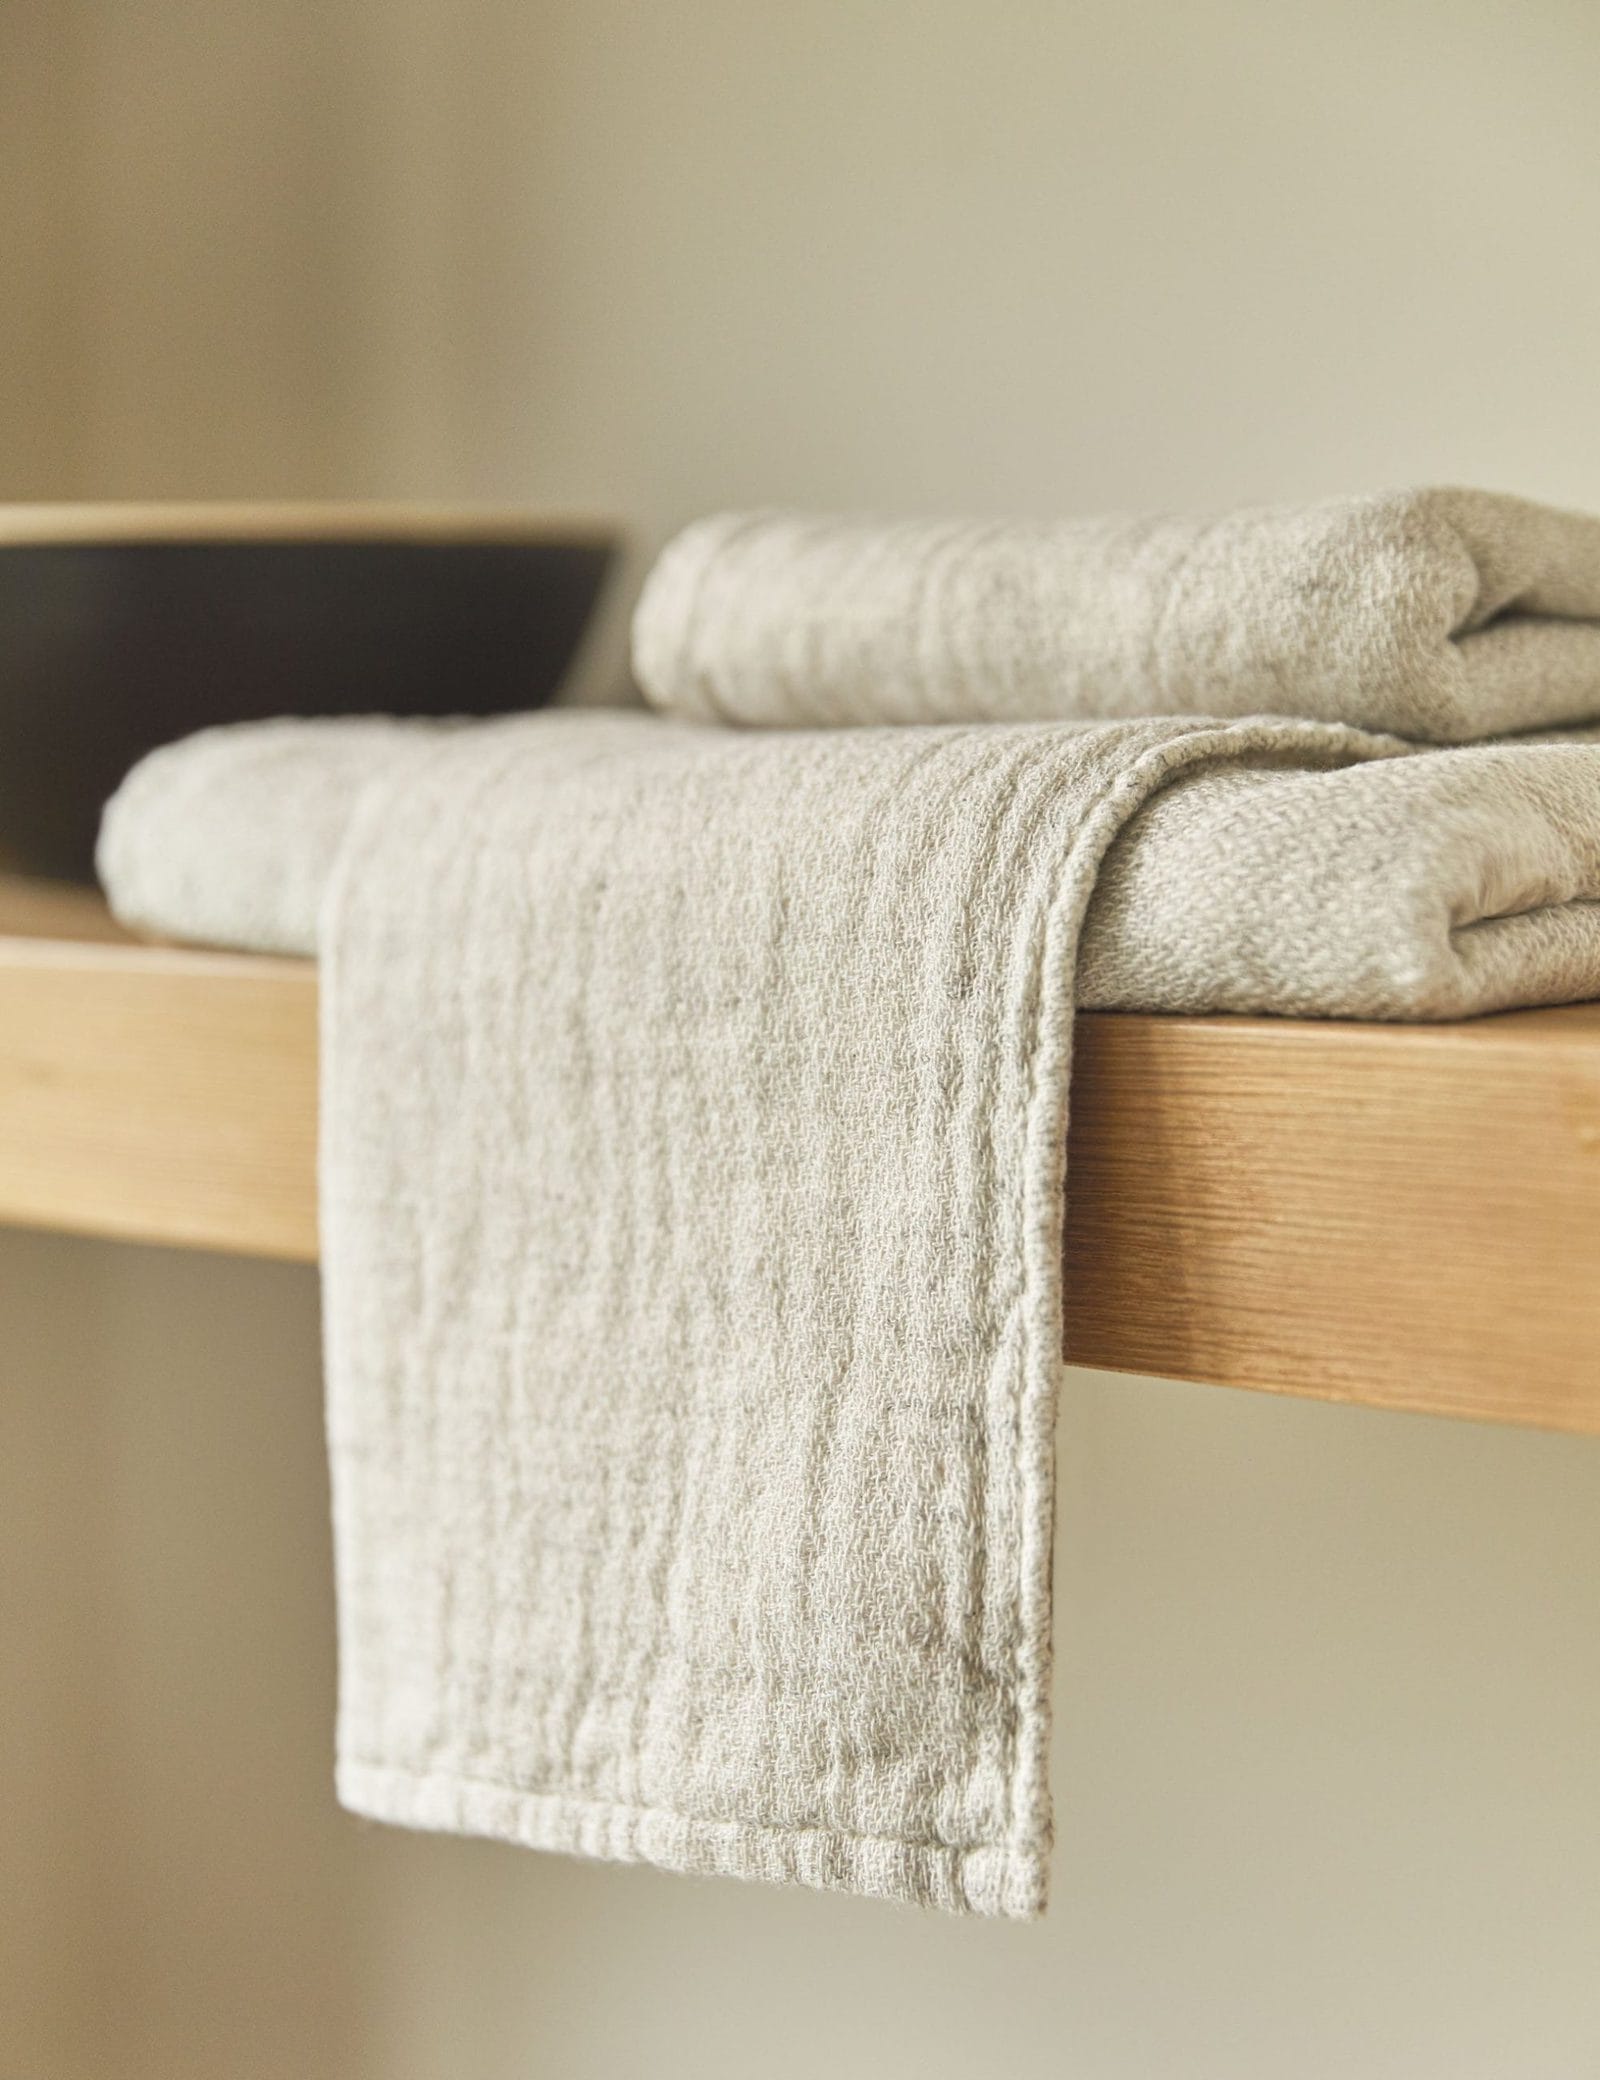 Keep Your Shelves Looking Stylish with Terry Cotton Towels